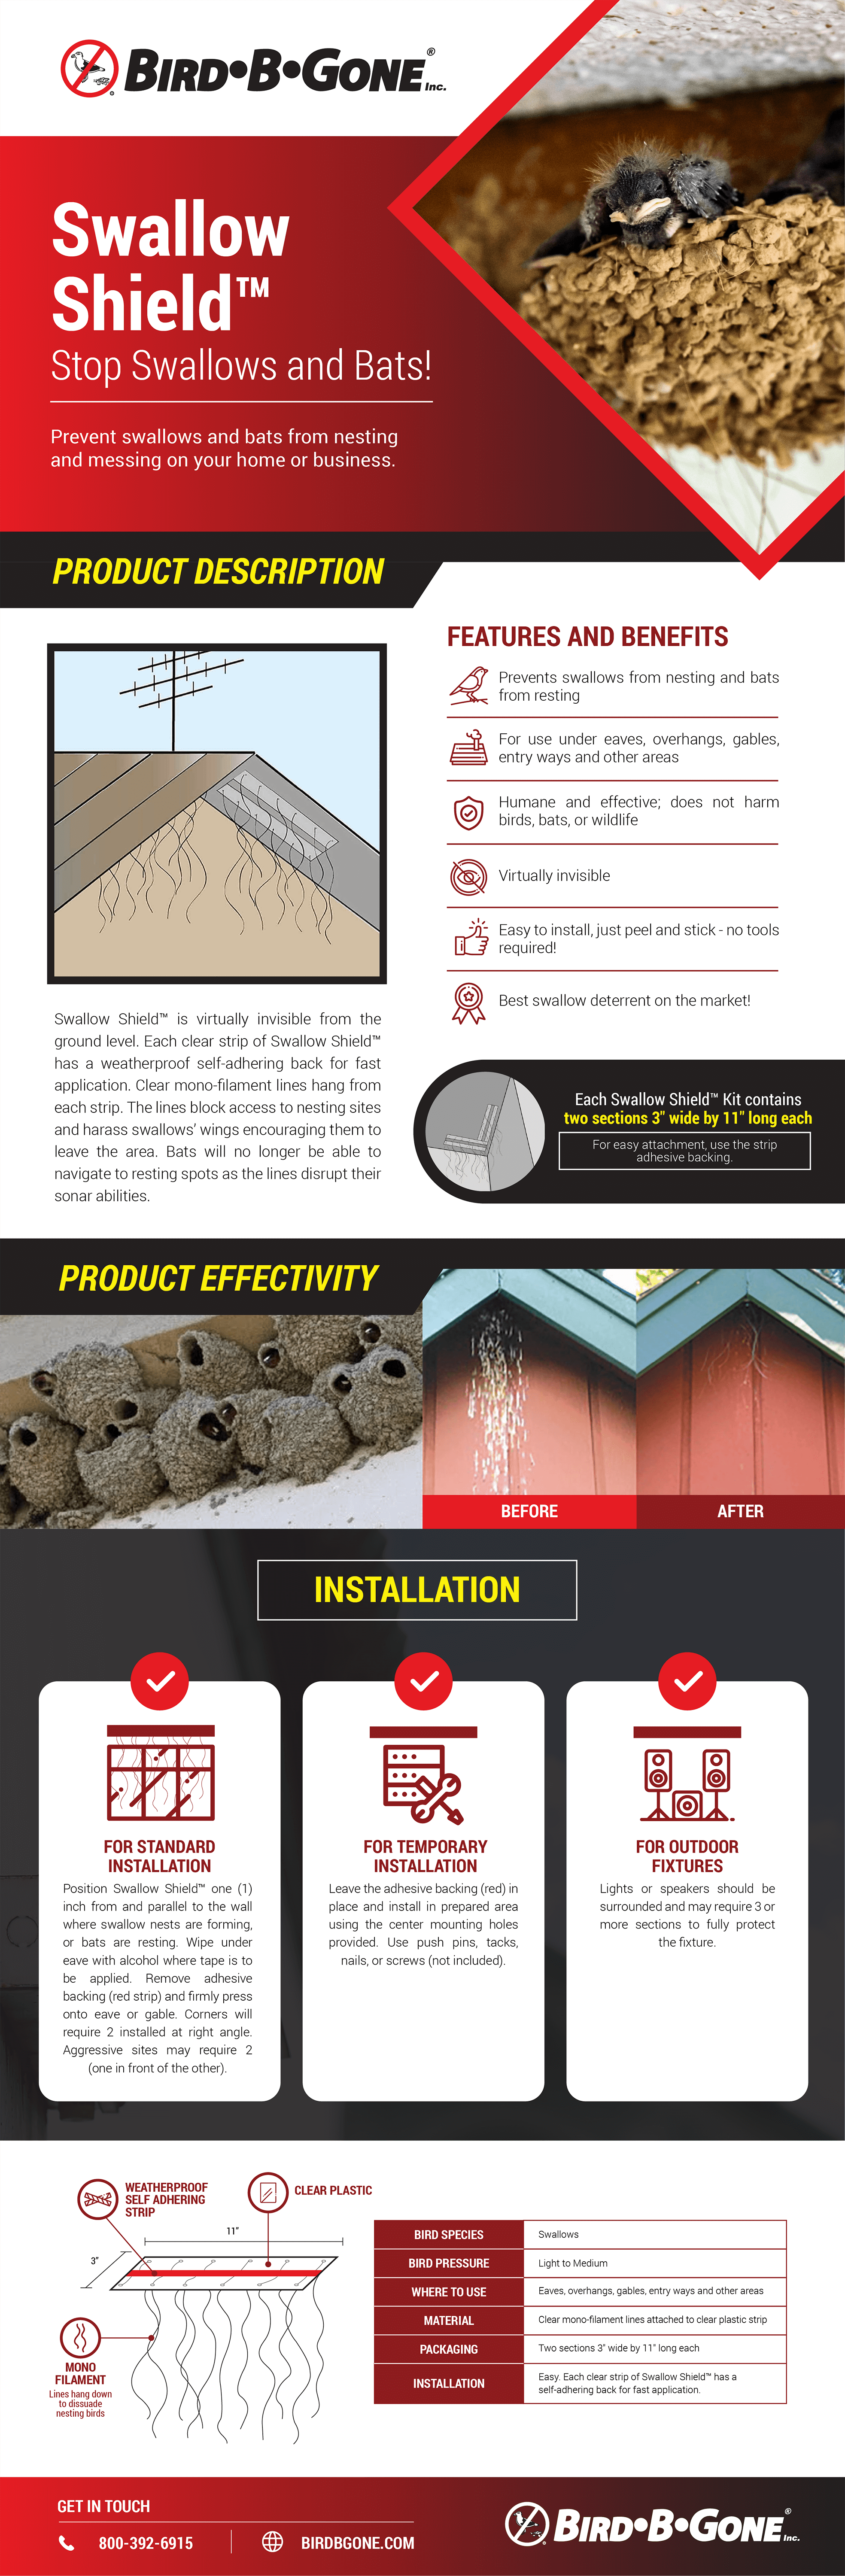 Swallow Shield Infographic